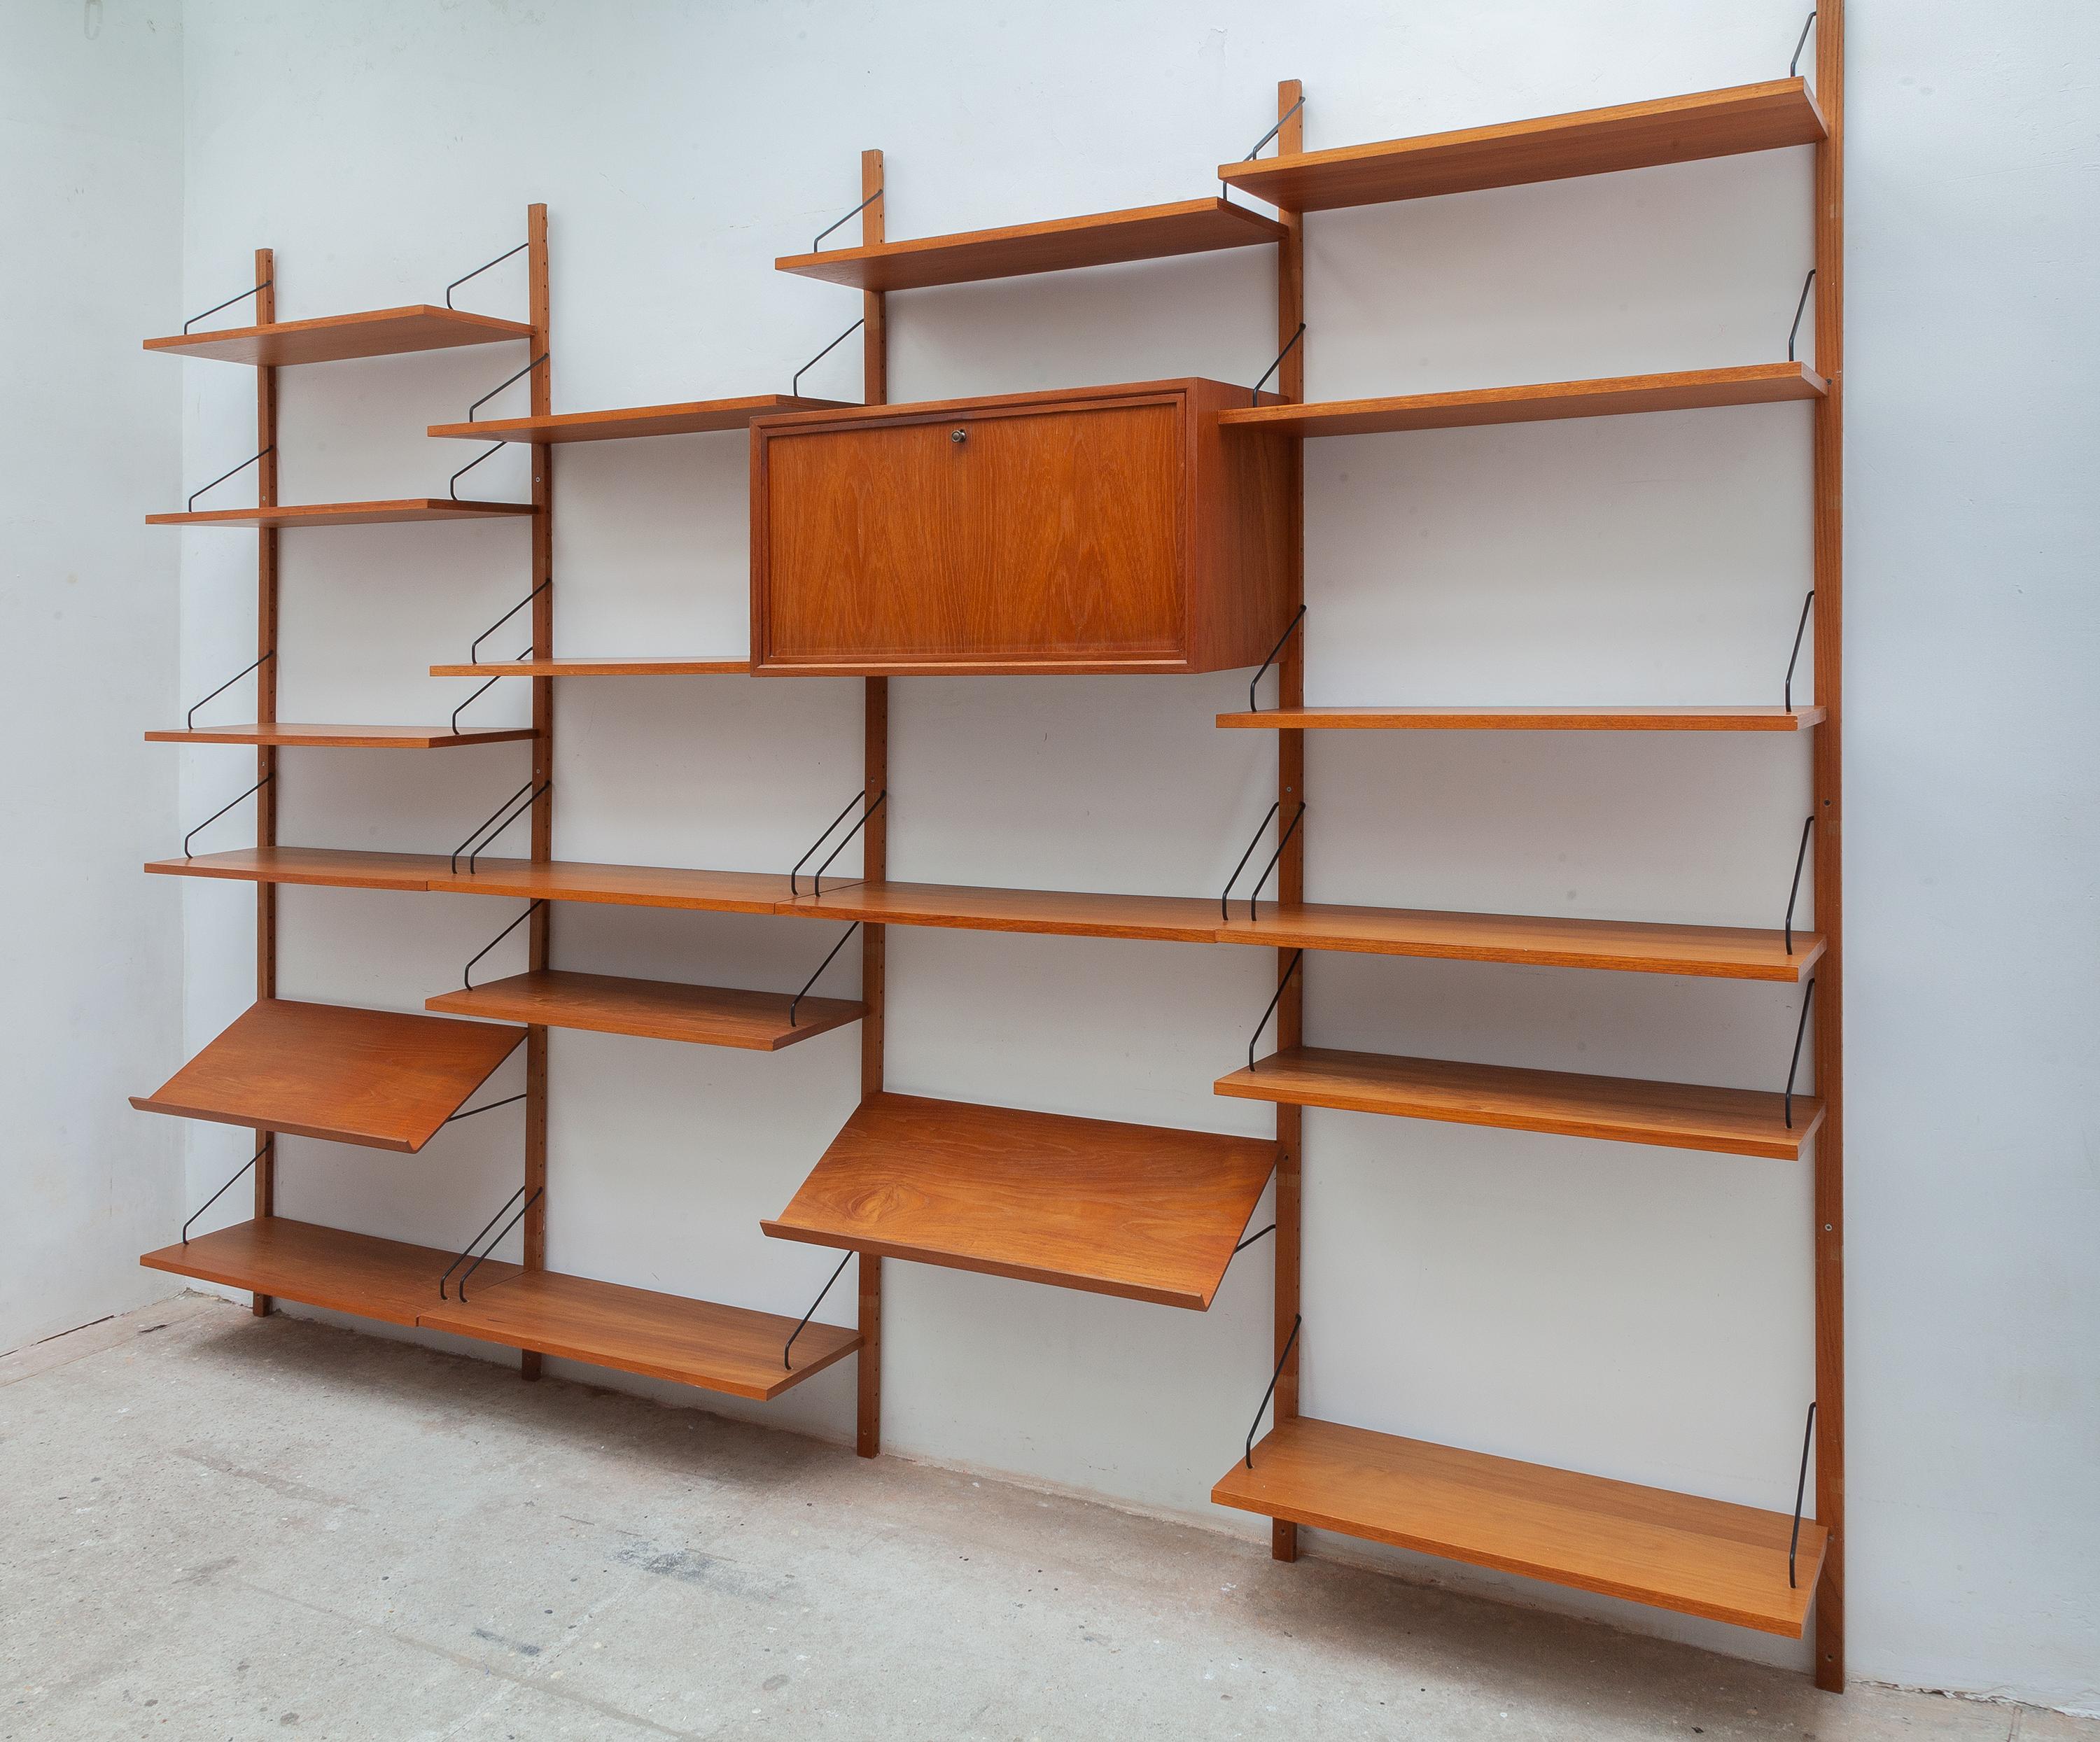 Vintage Midcentury Danish wall unit designed by Poul Cadovius Royal System with solid teak brackets. Five wood rails suspend five cabinets, has maker’s stamp. Well designed modular system with many movable shelves includes the hard to find magazine